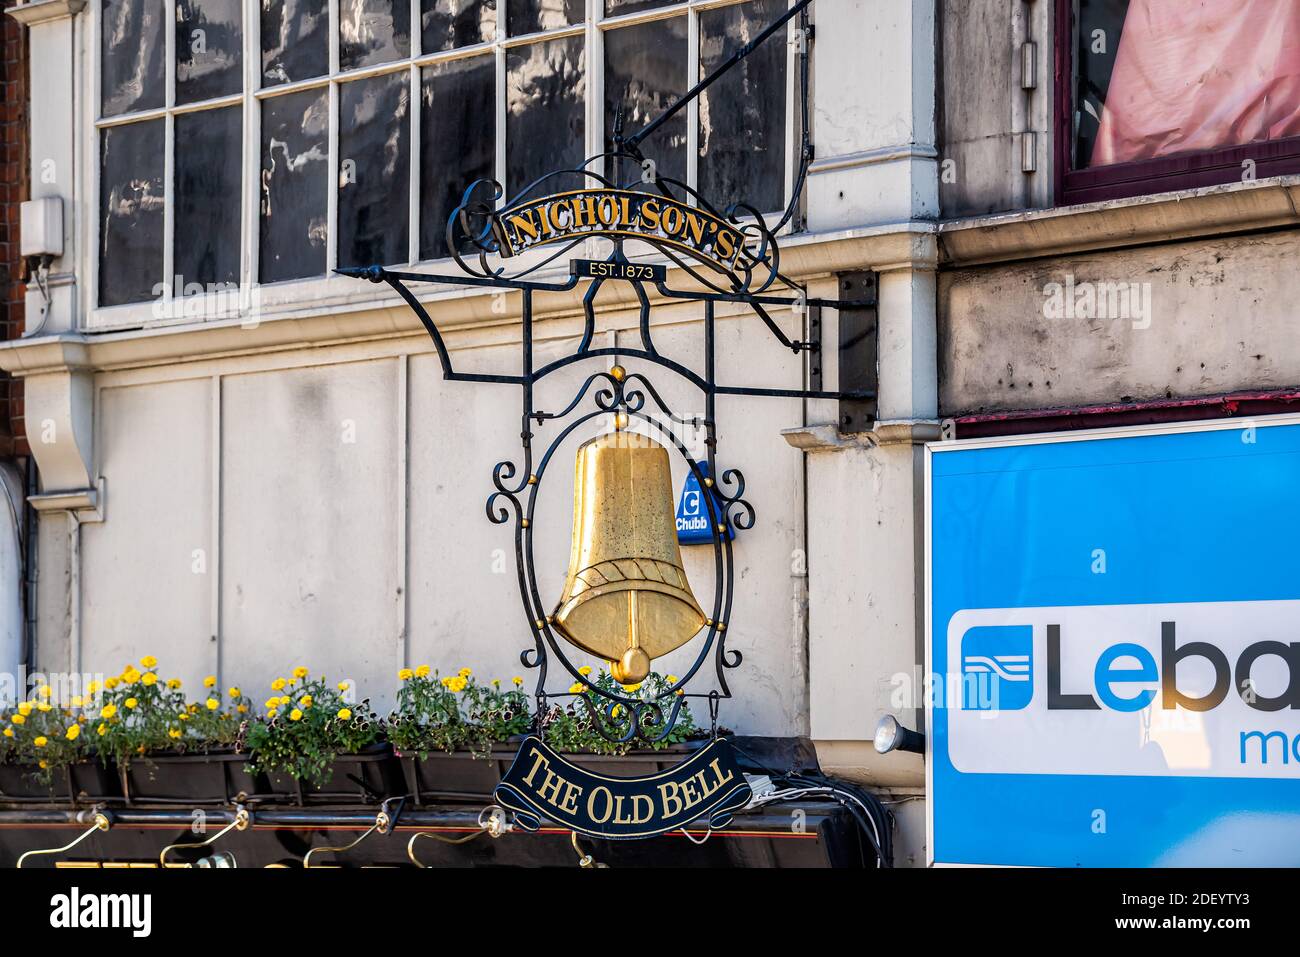 London, UK - June 22, 2018: Closeup of famous The old bell tavern pub bar entrance sign and nobody with gold symbol and Nicholson's text with date Stock Photo